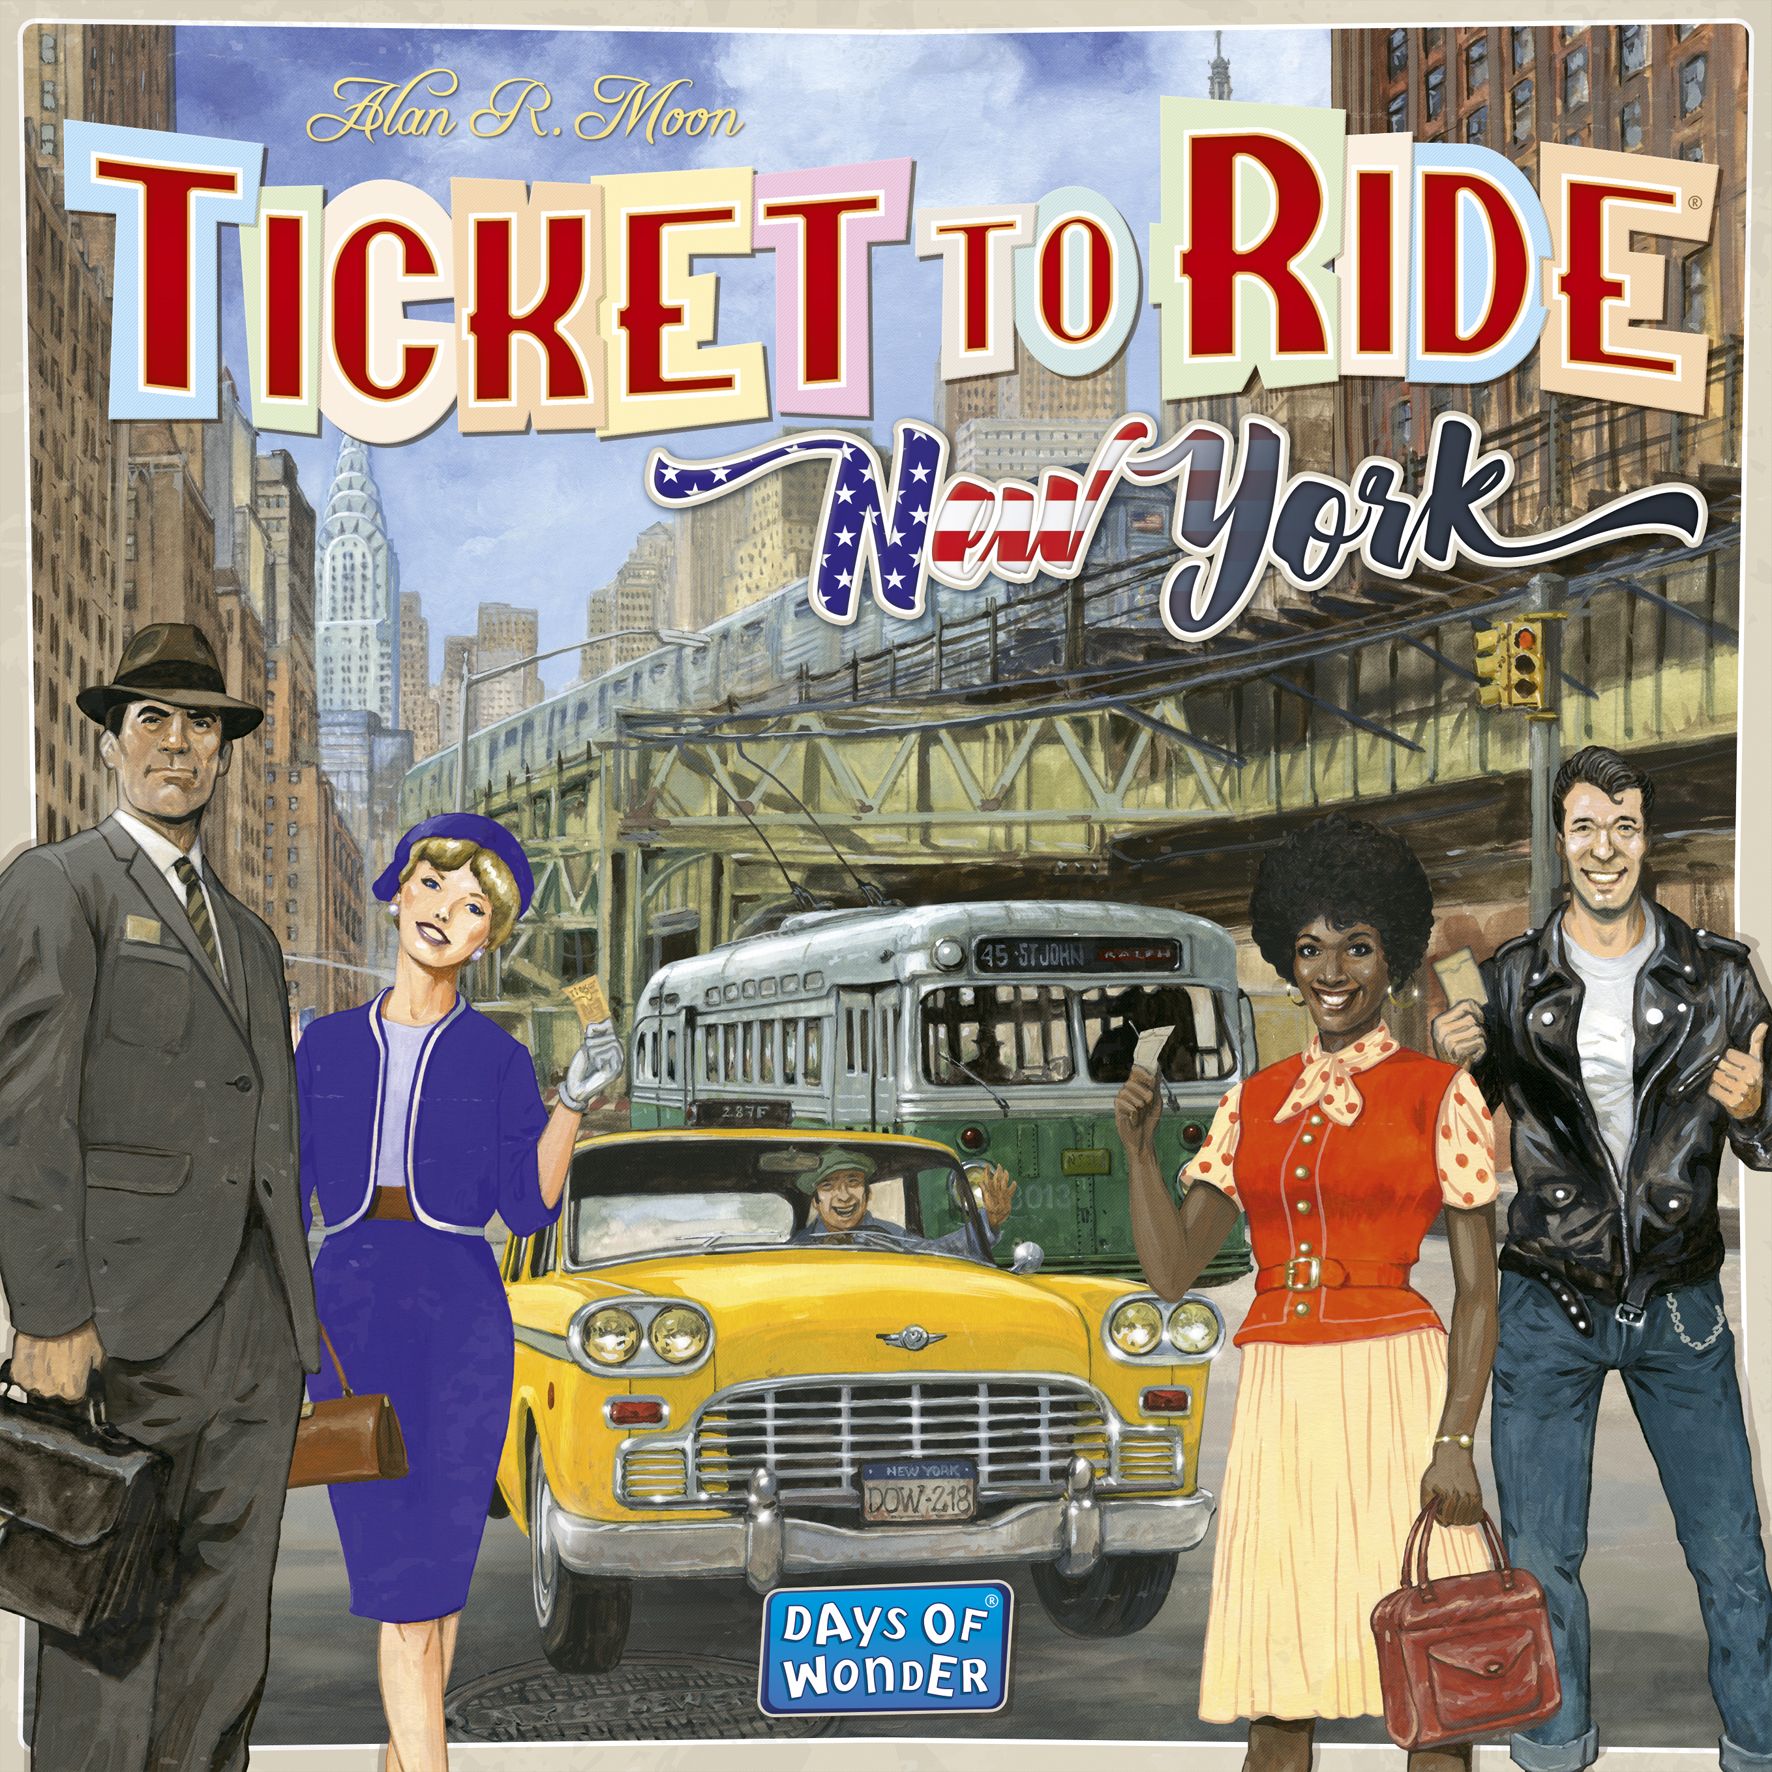 Read more about the article Ticket to Ride: New York